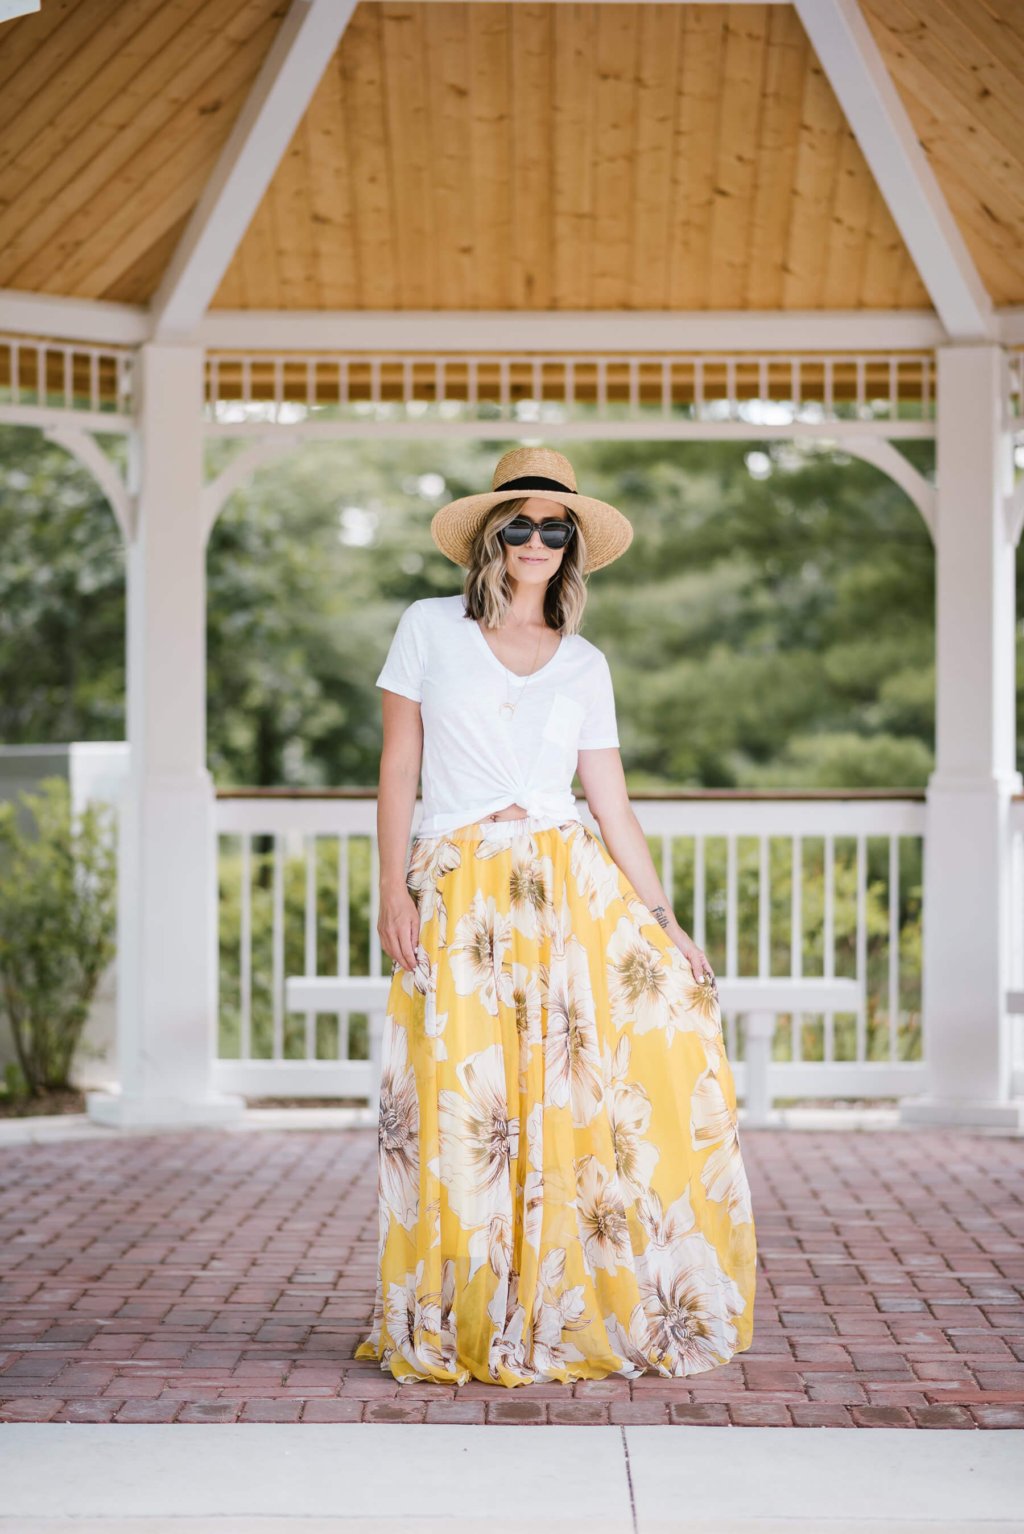 Summer style: floral maxi skirt, white tee, straw hat, sunglasses, sandals